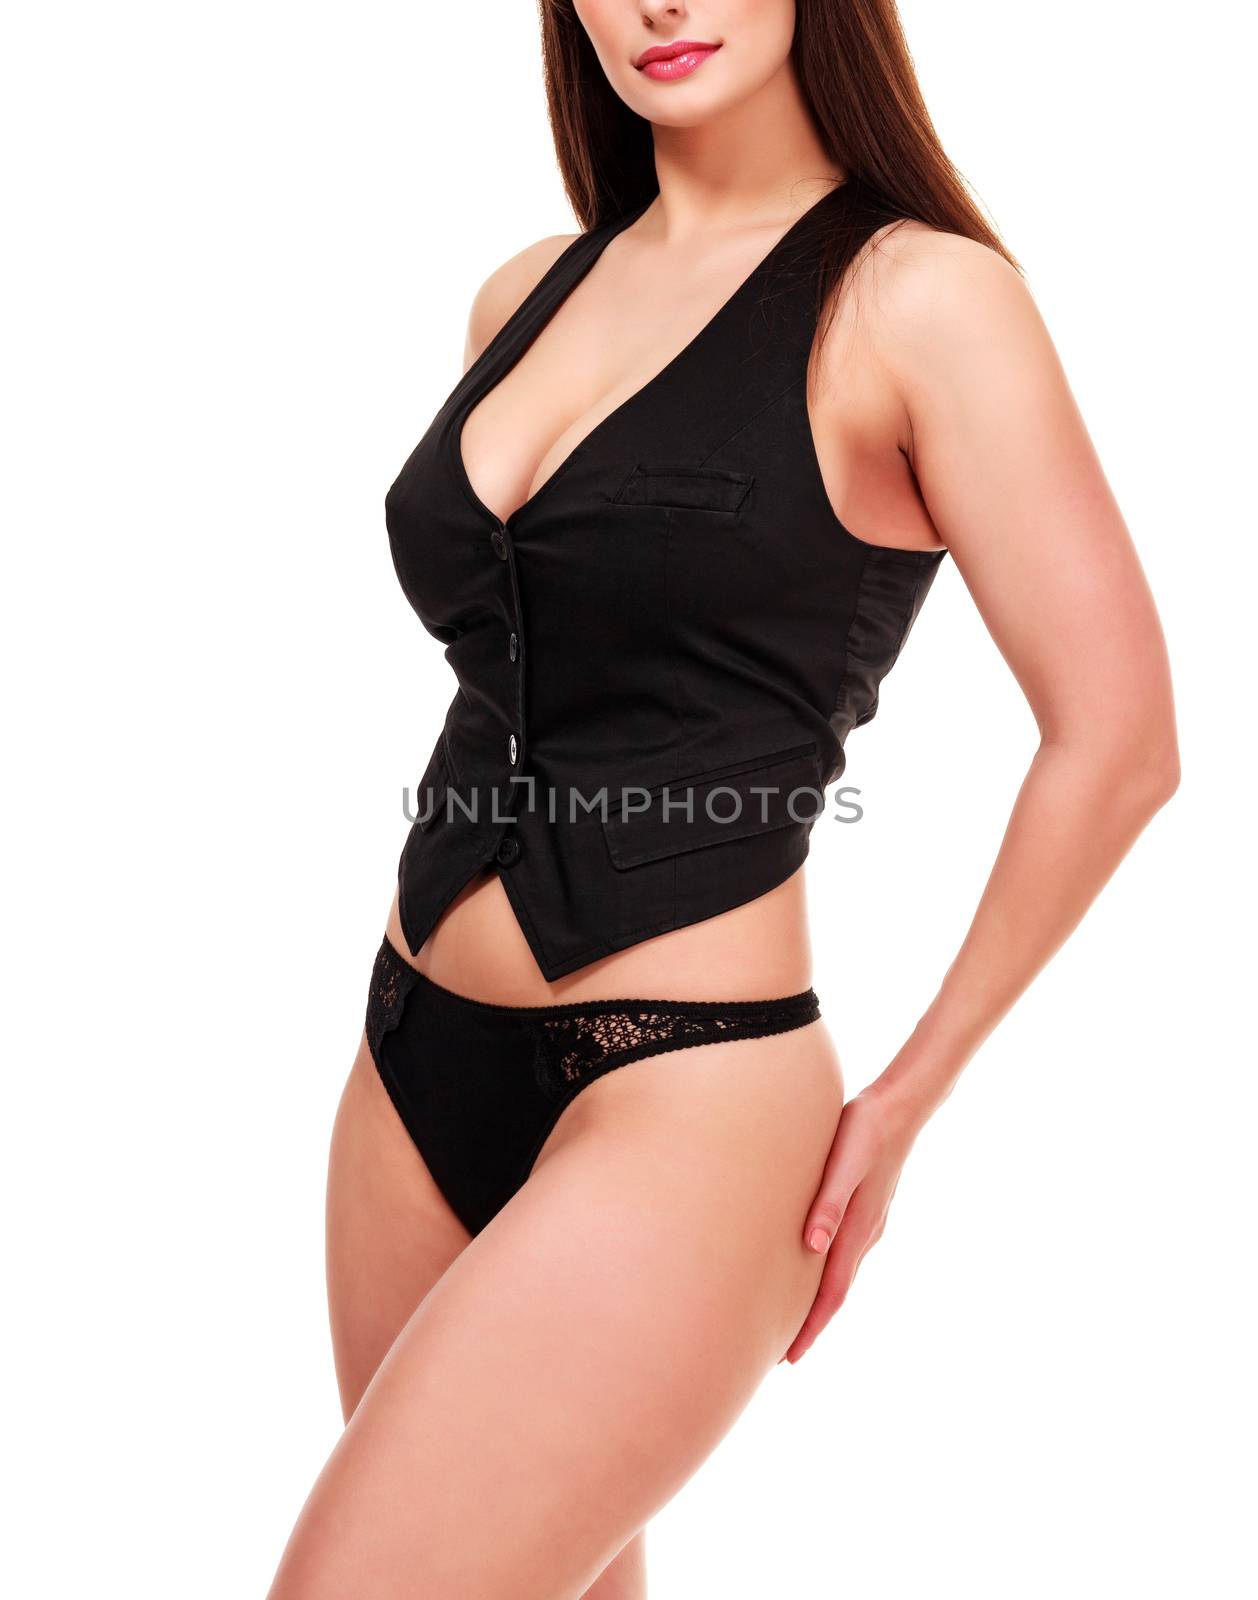 Sexy woman in black underwear vest and bikini, isolated on white background